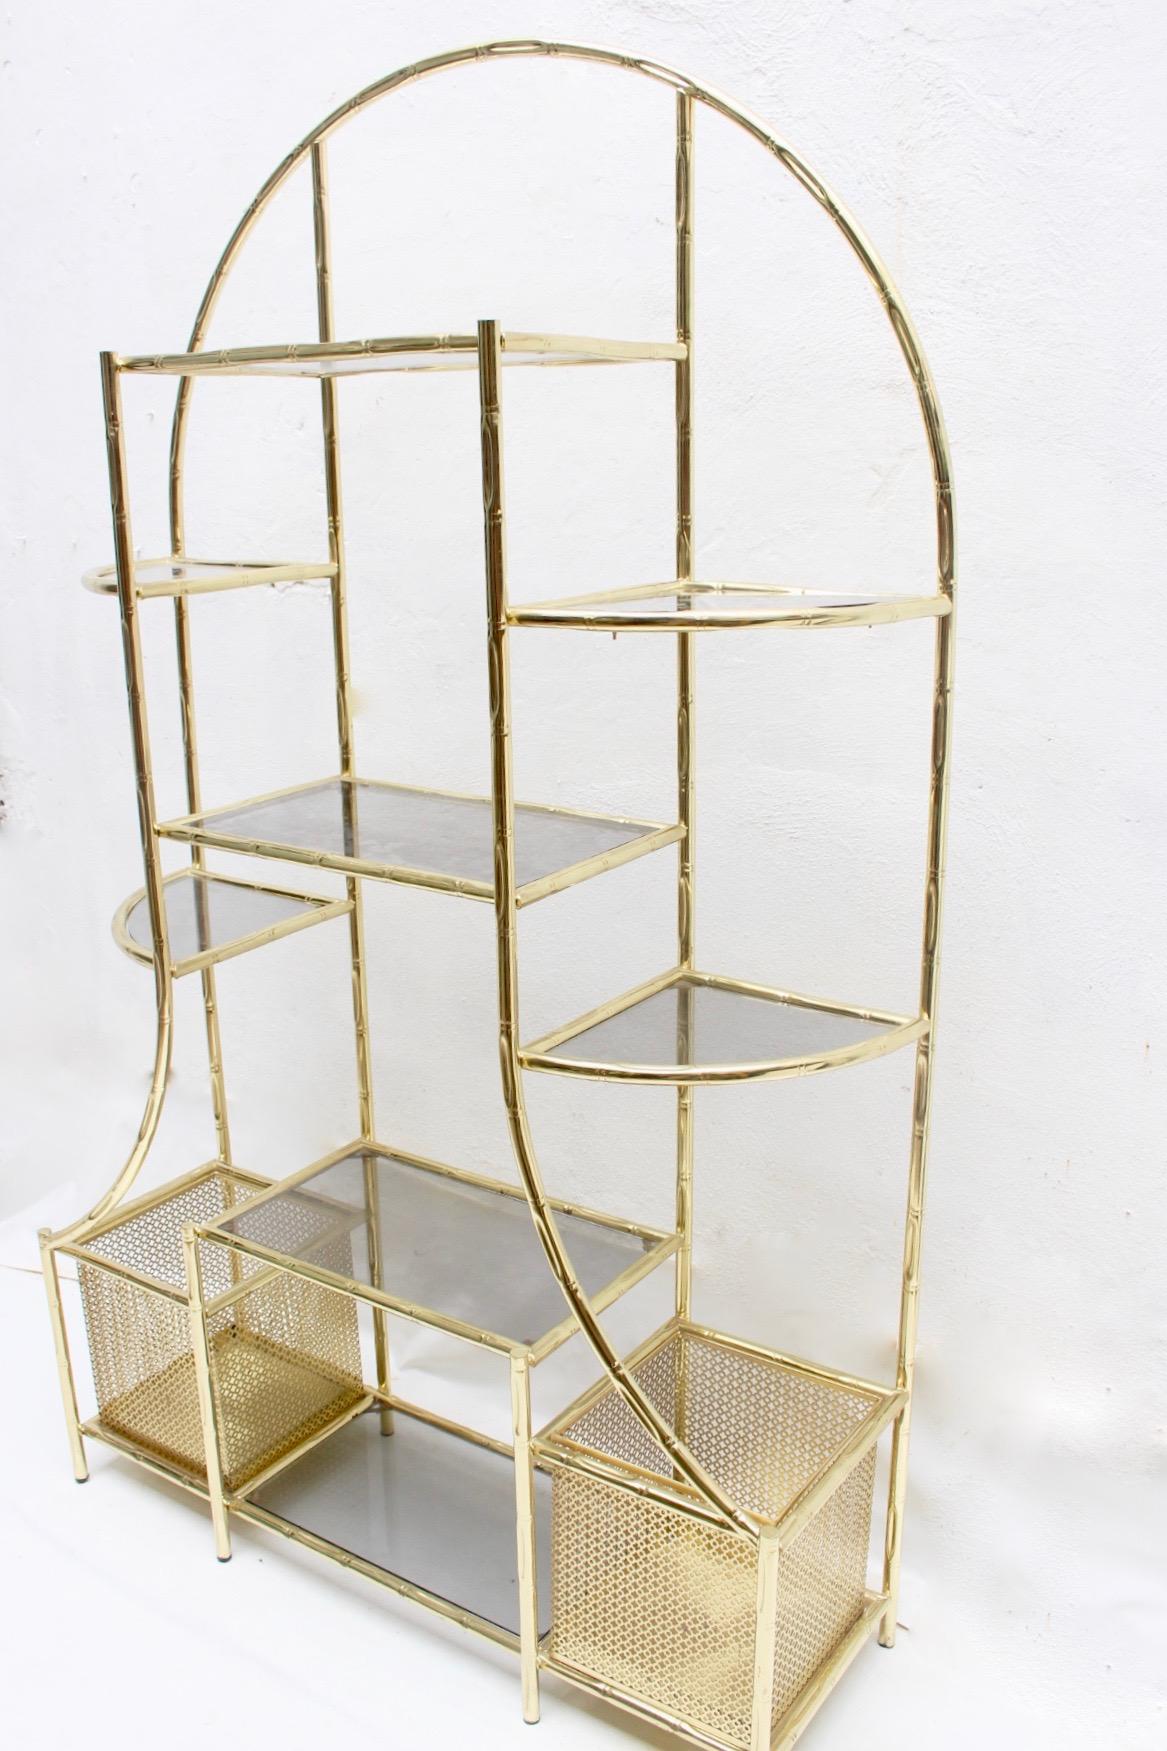 Midcentury Faux Bamboo Iron and Glass Étagère, Spain, 1970s For Sale 2